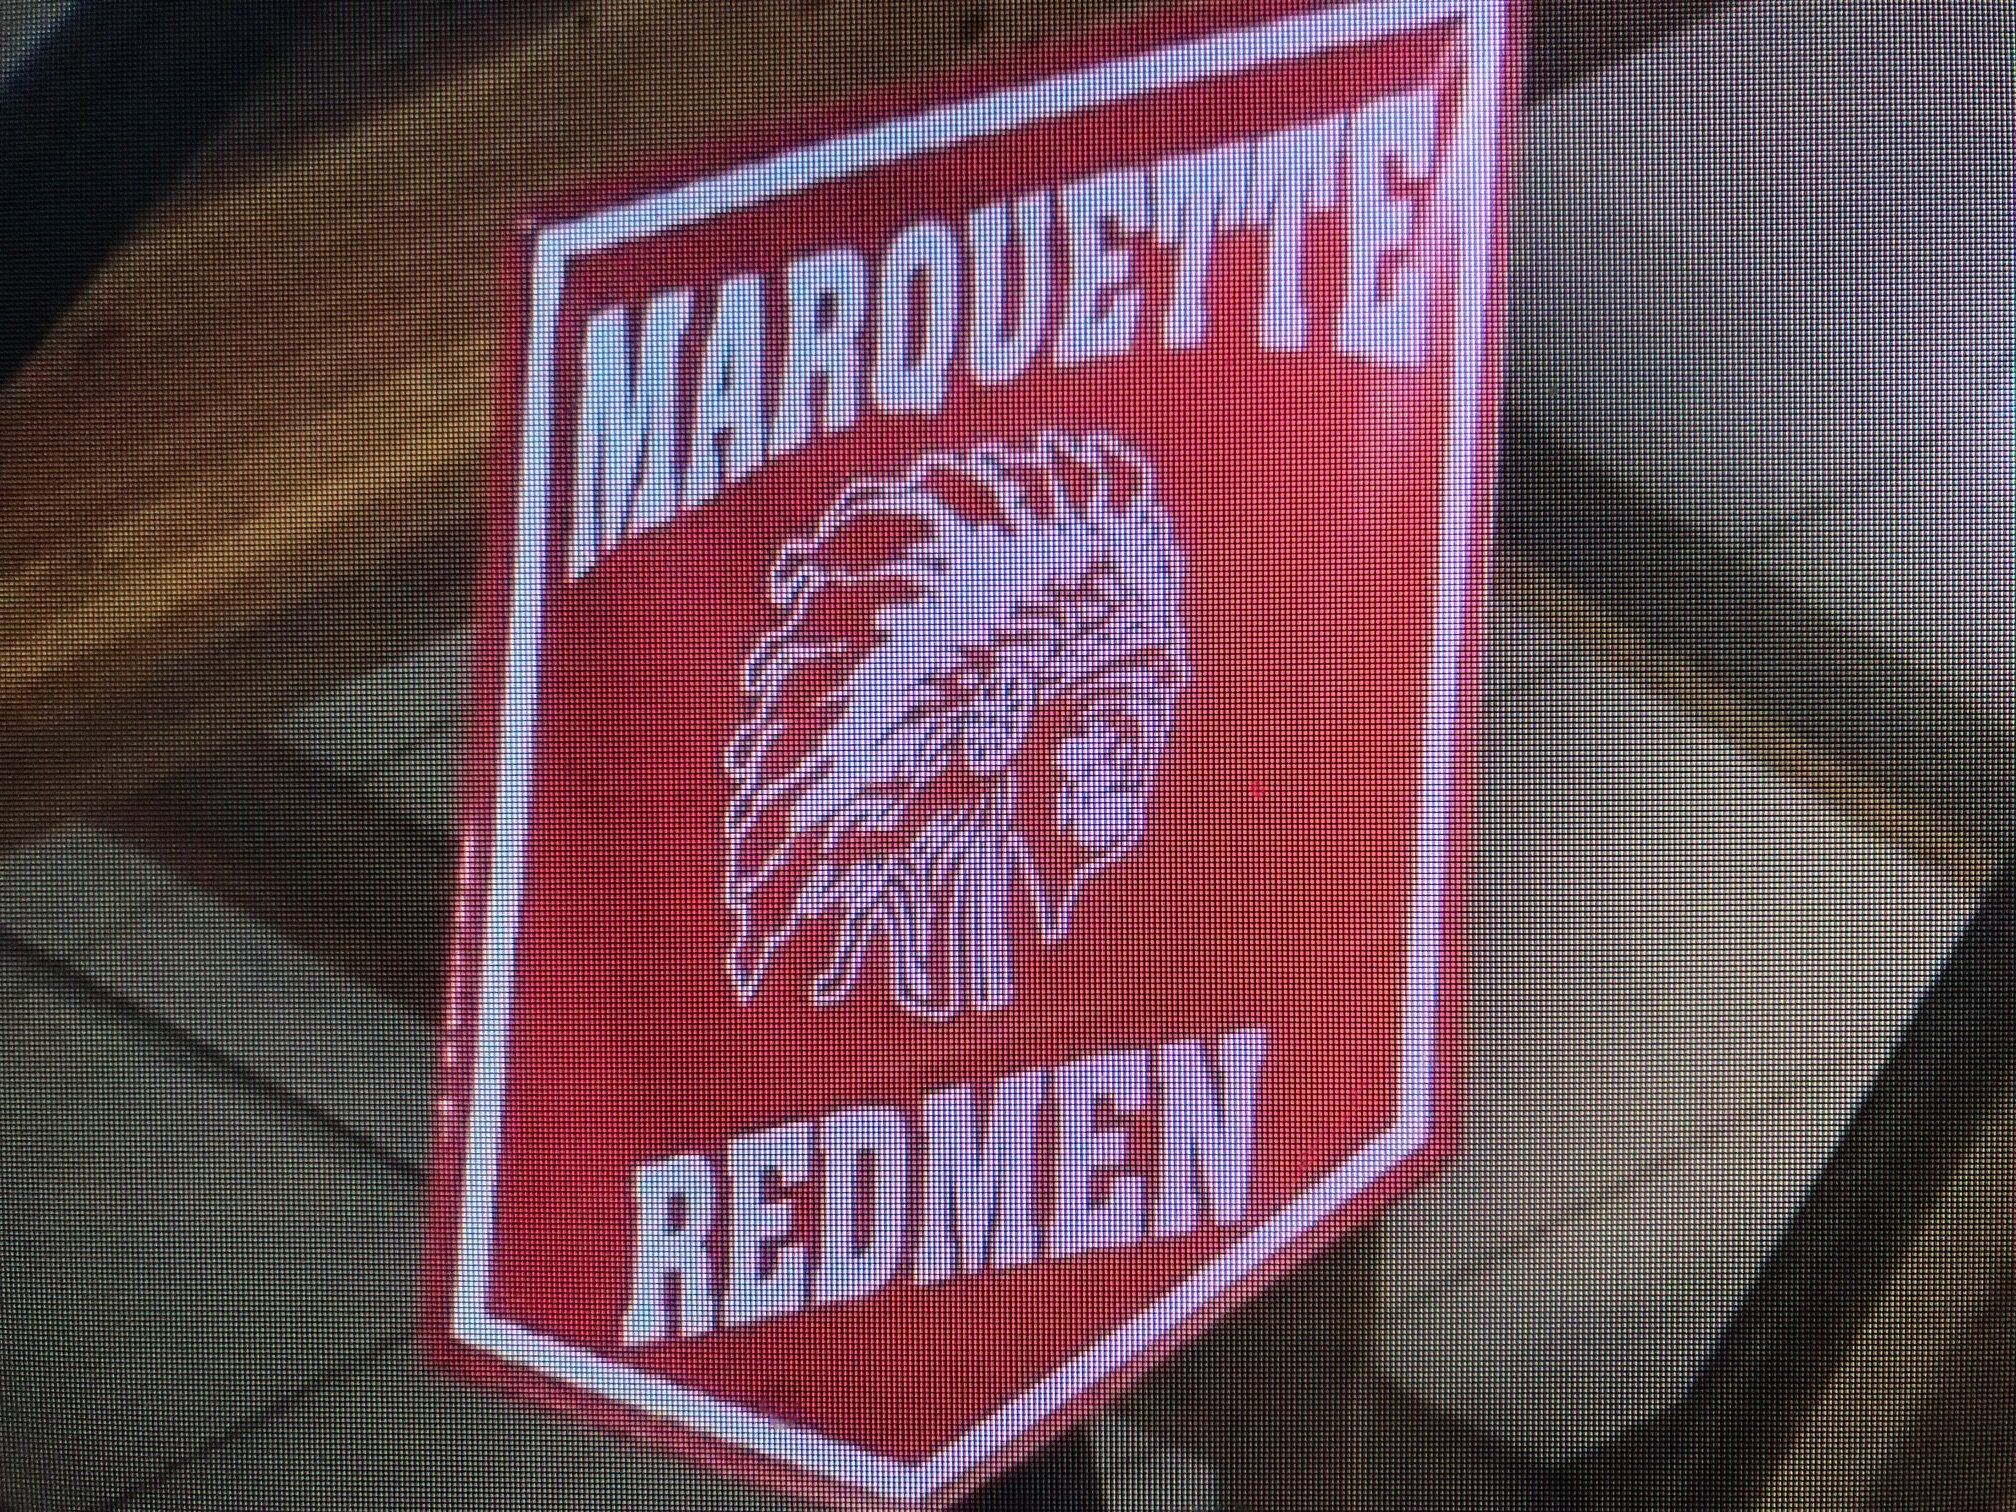 MHS to be included in effort to rid schools of Native American mascots